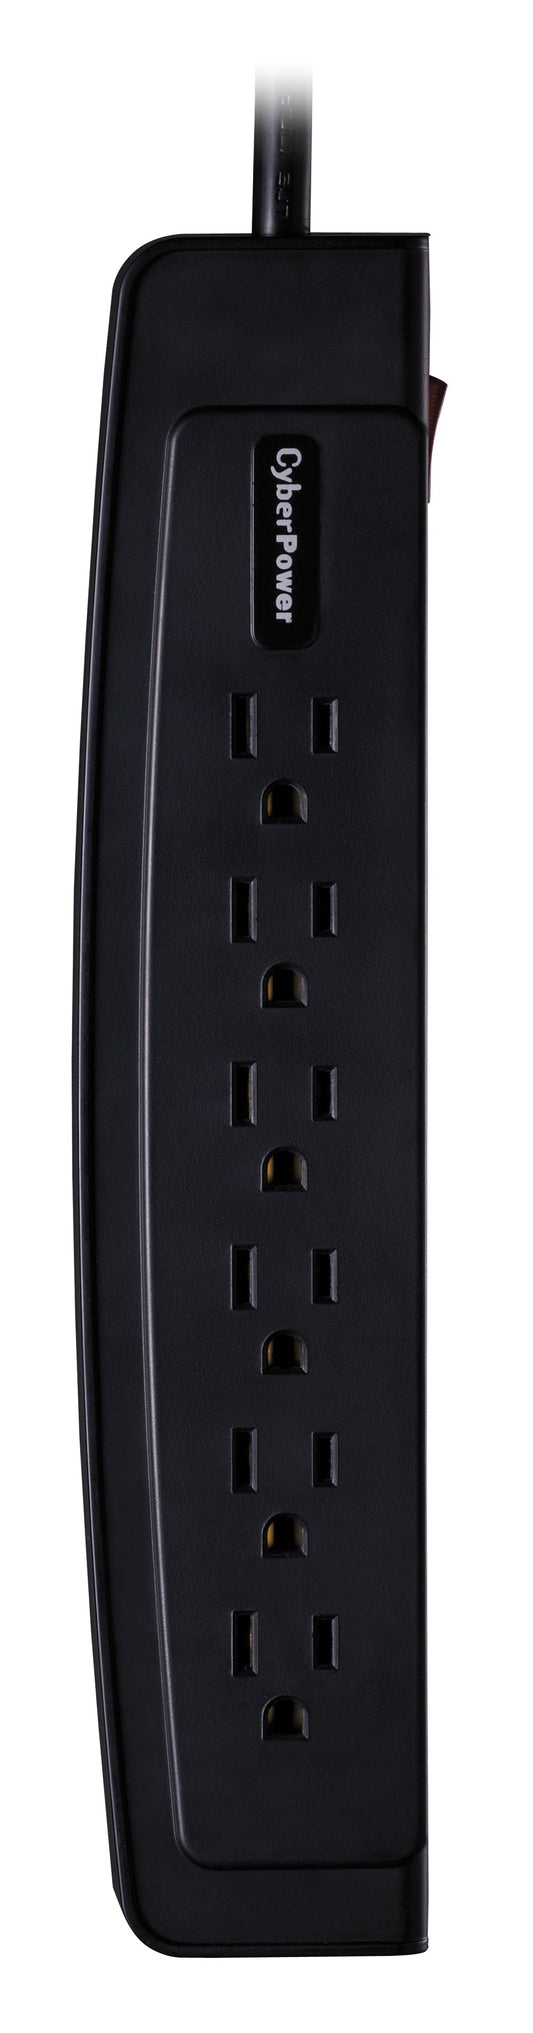 Cyberpower Csp604T Surge Protector Black 6 Ac Outlet(S) 125 V 1.2 M